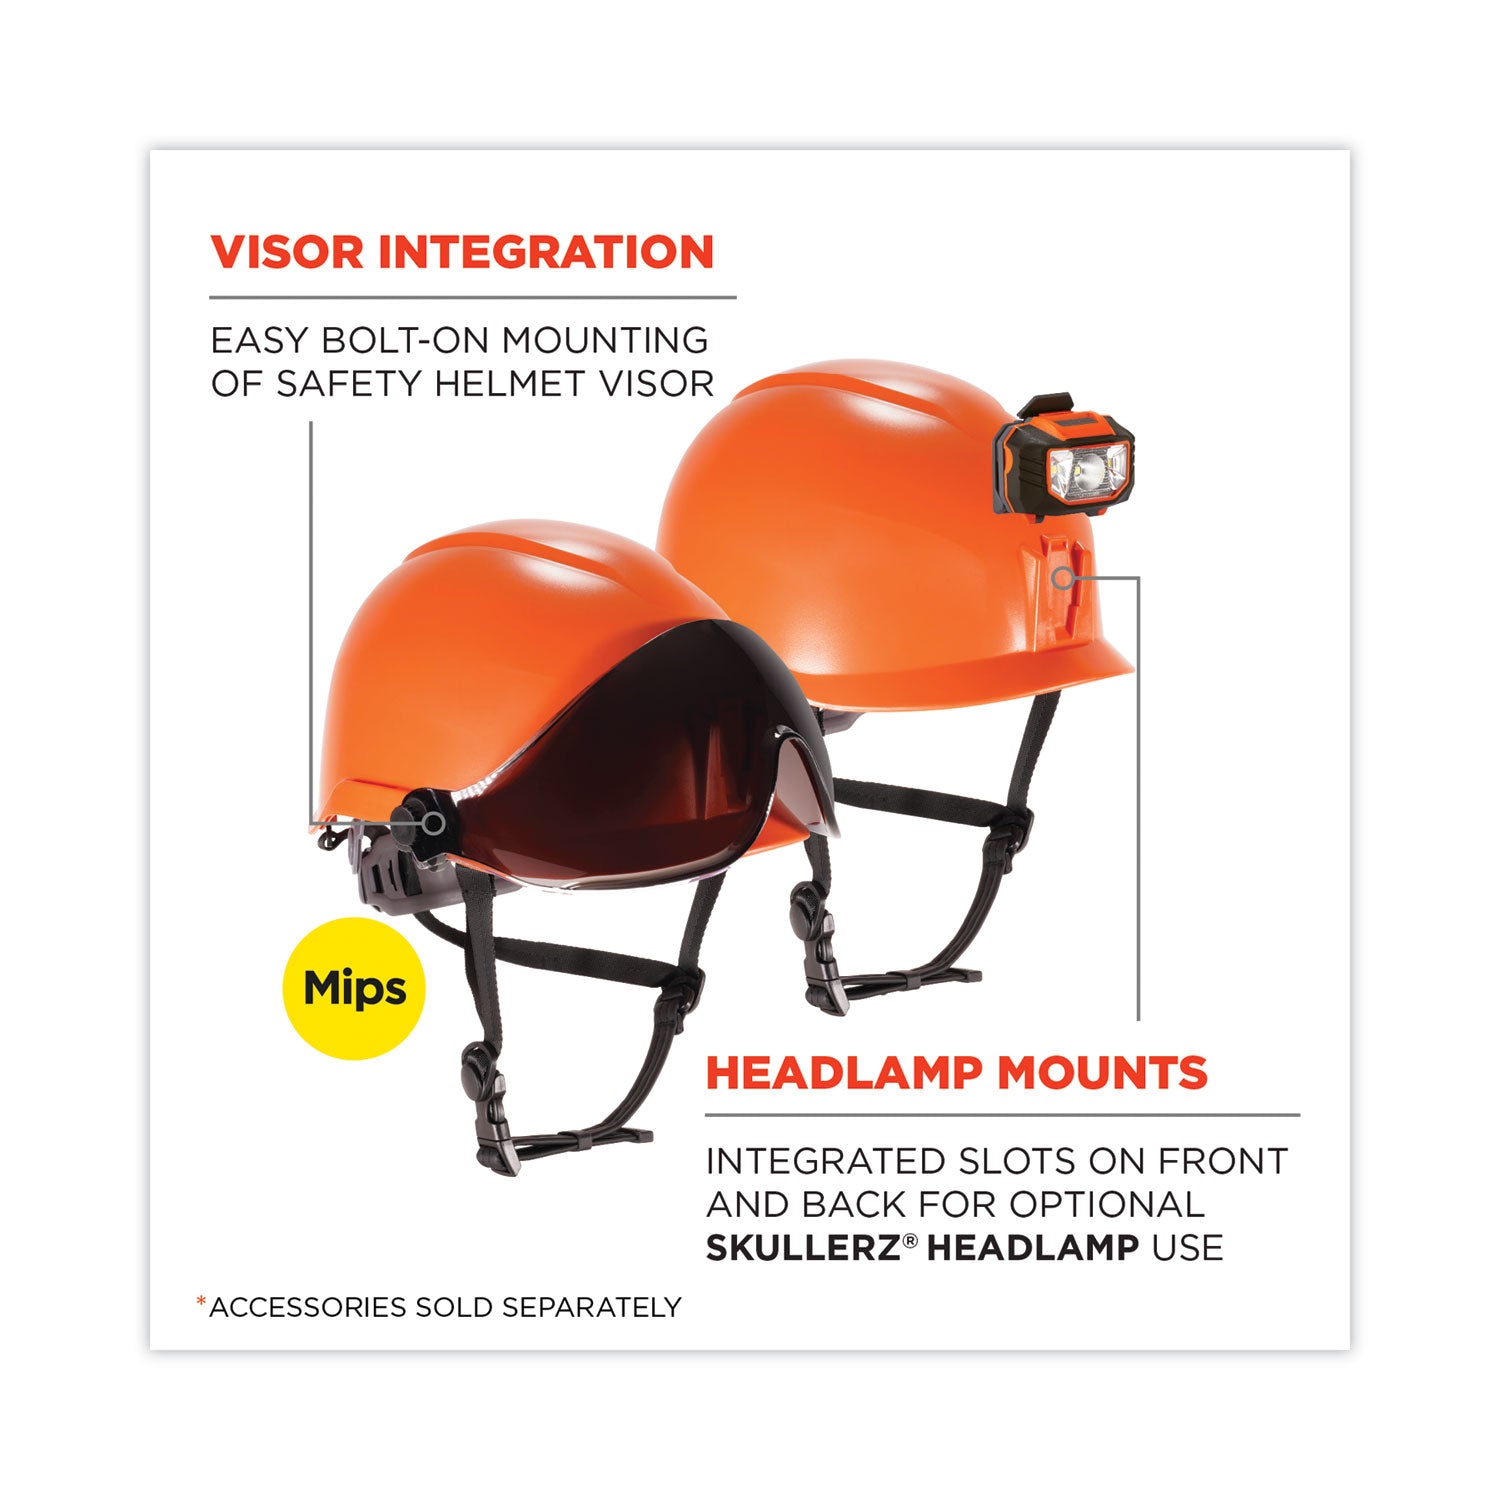 skullerz-8974-mips-class-e-safety-helmet-with-mips-elevate-ratchet-suspension-orange-ships-in-1-3-business-days_ego60255 - 6